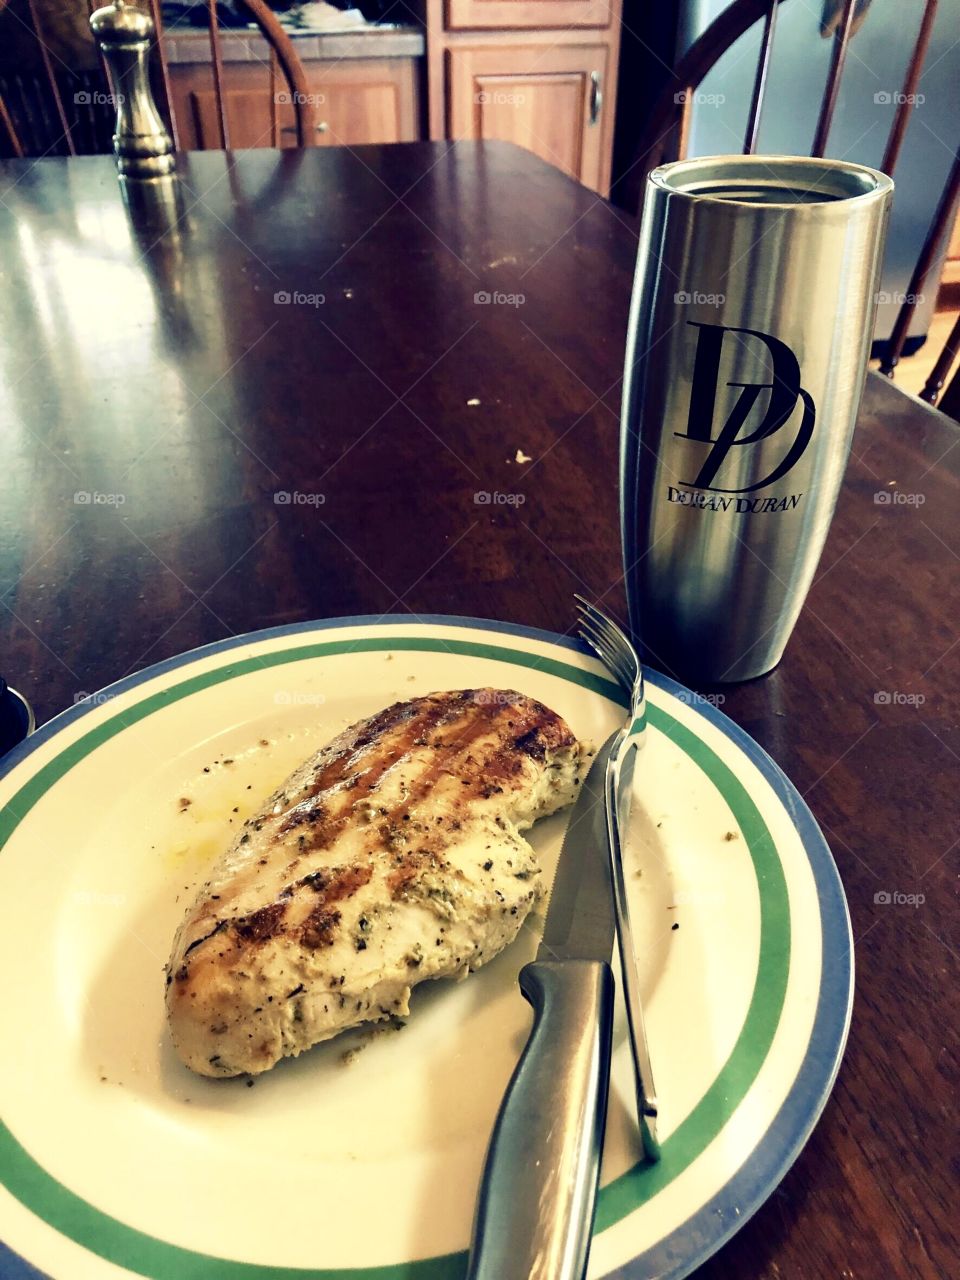 Chicken breast and Duran Duran metal cup.